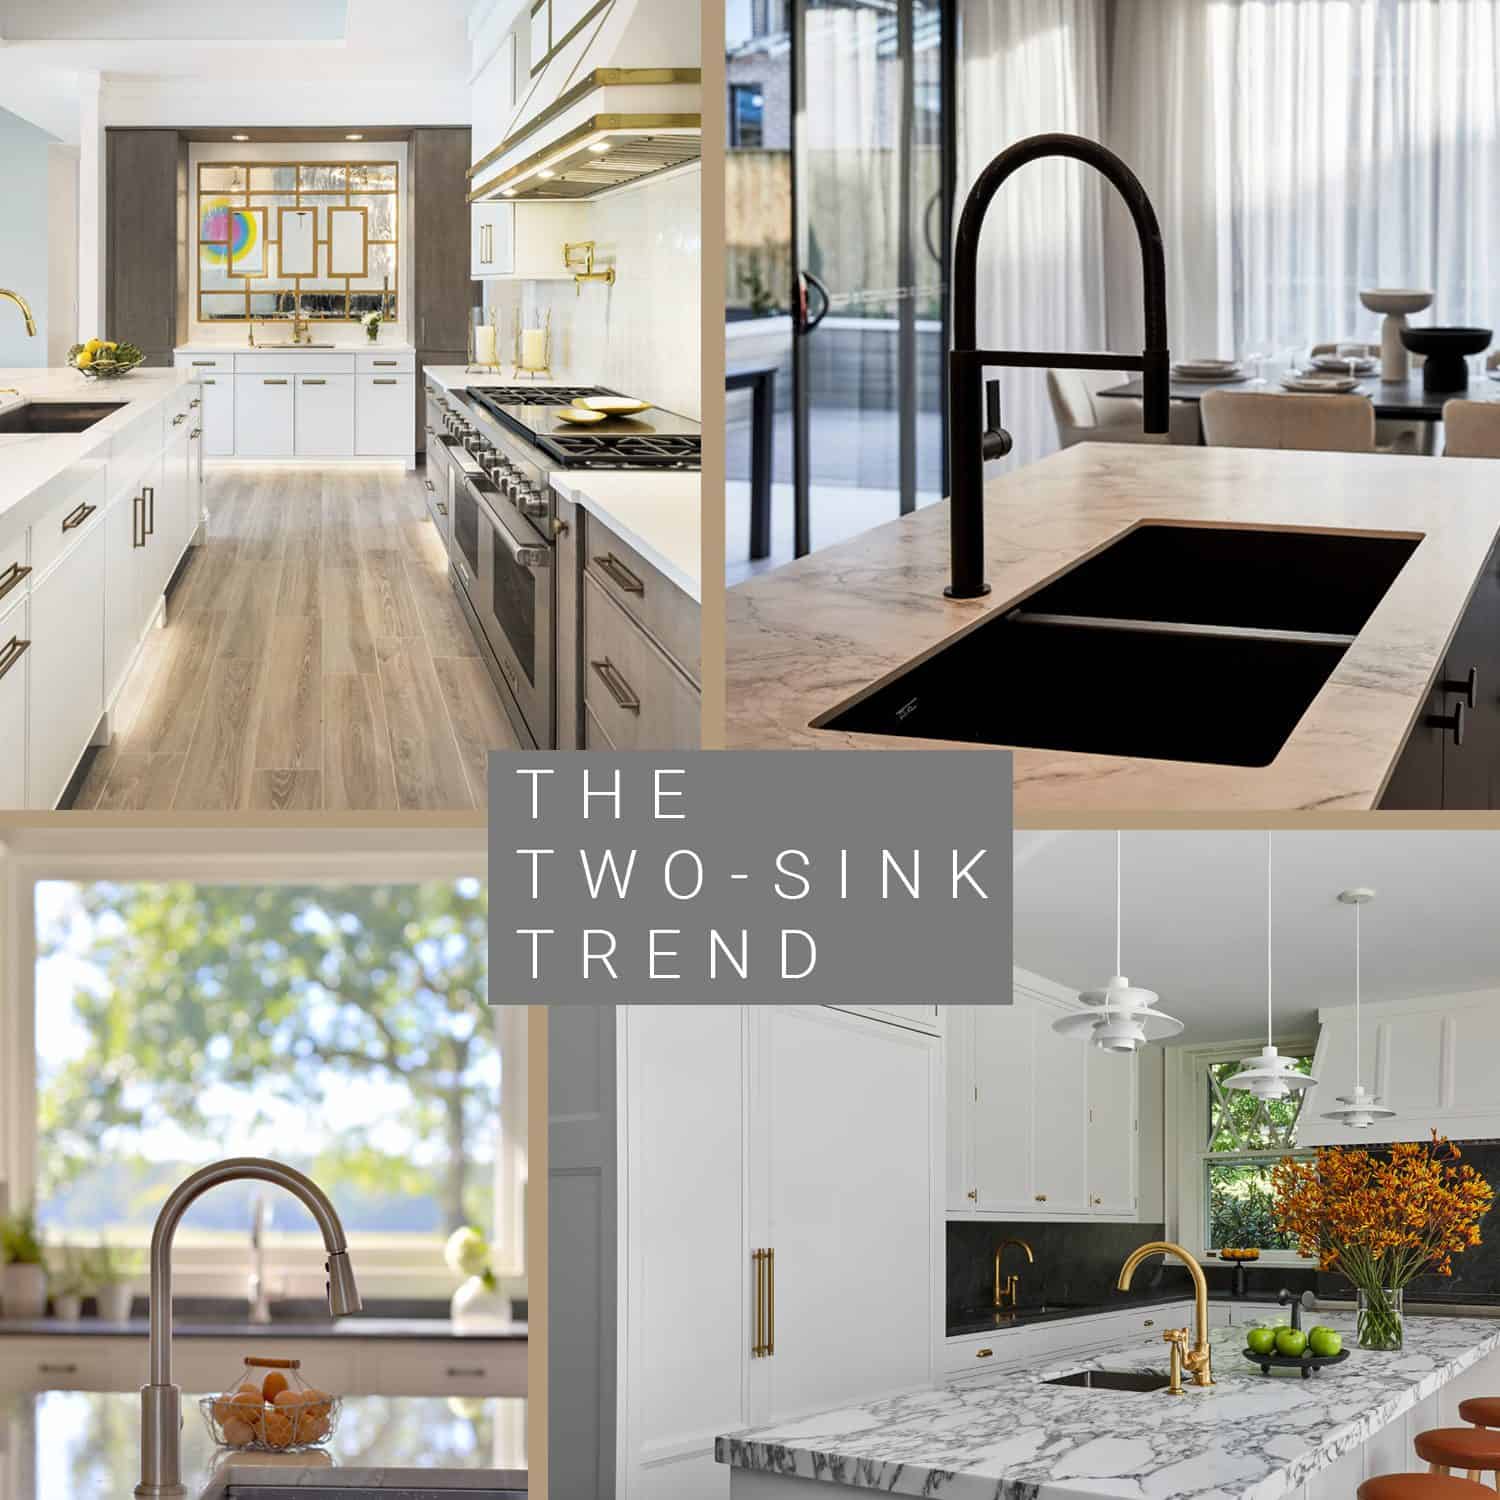 The Two-Sink Trend